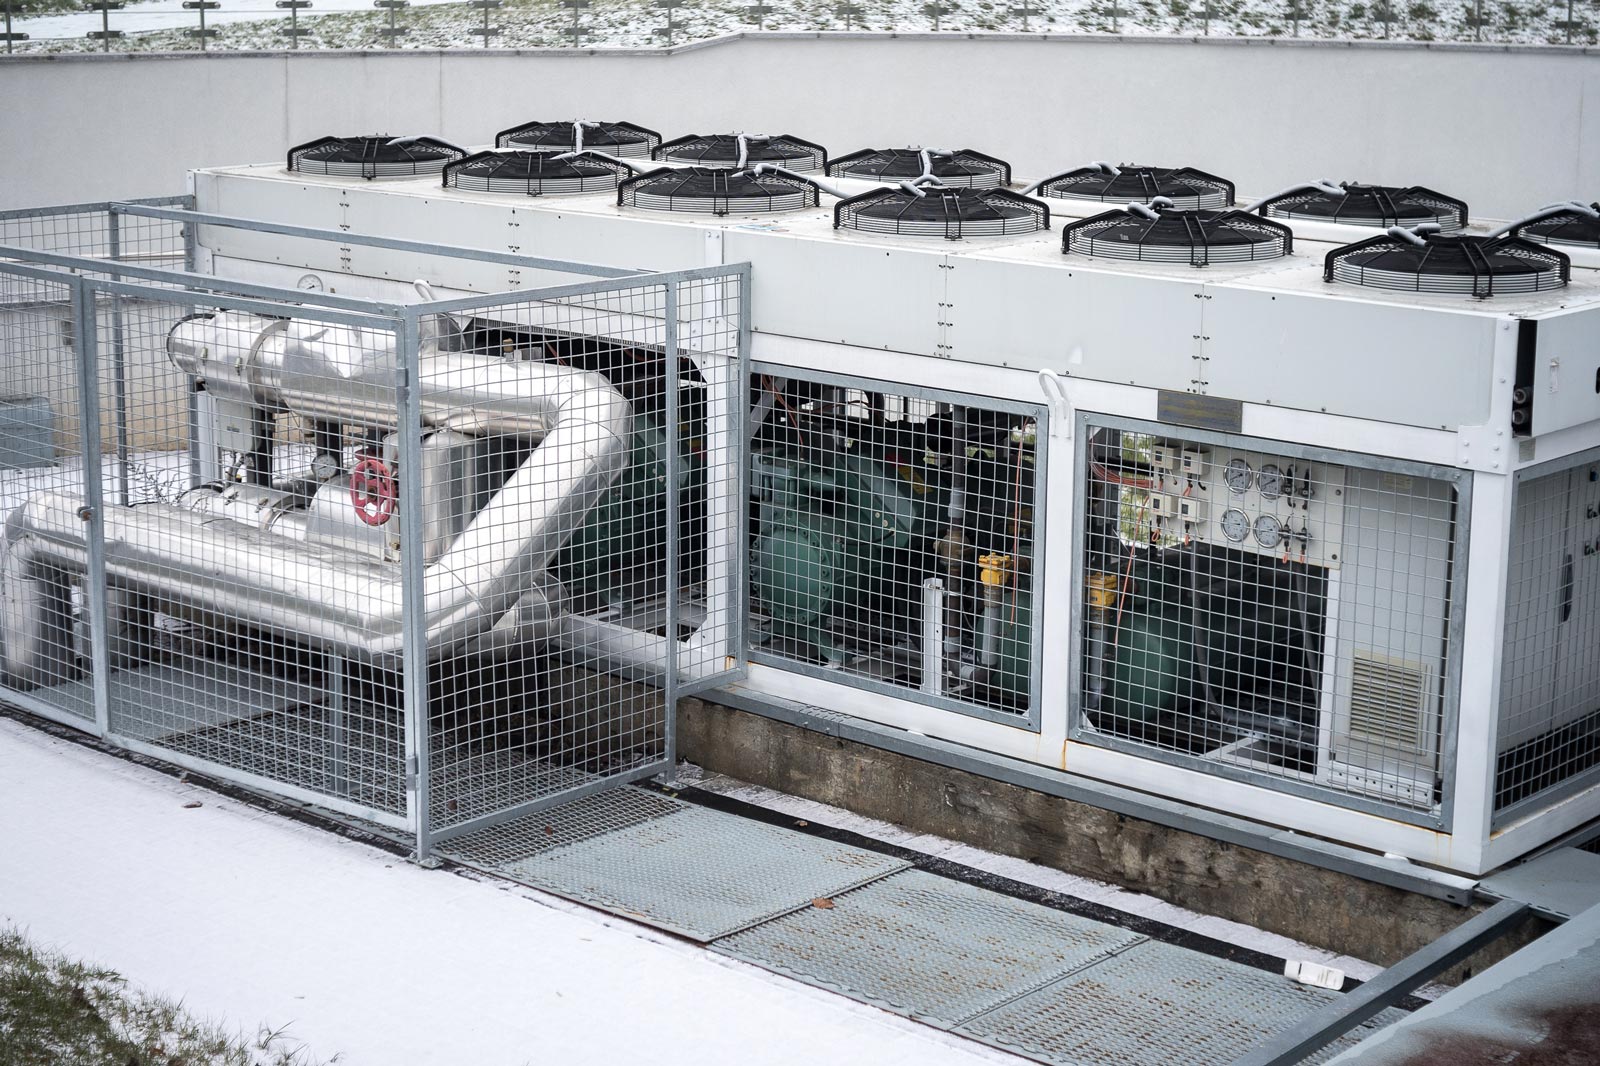 What Do I Need to Know about R-22 Refrigerant?